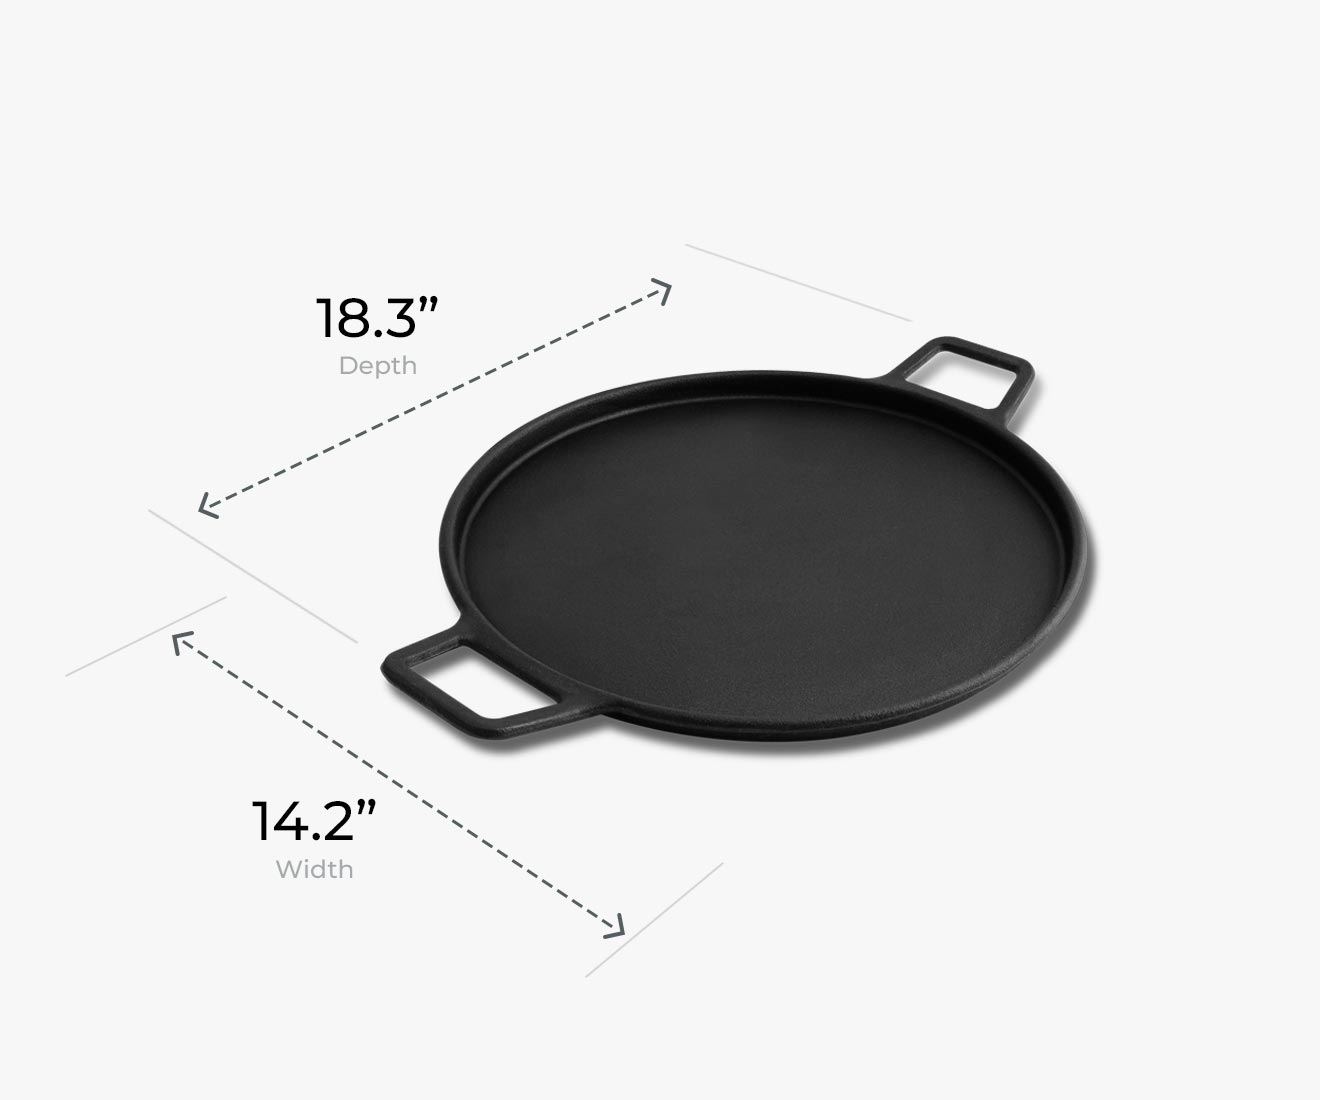 Kenmore Cast Iron Pizza Pan Round Griddle with Handles | 14”, PA-20208, Perfect for Crepes, Frozen Pizza, Tortillas, Baking, Stove, Oven, Grill, BBQ, Camping, Black